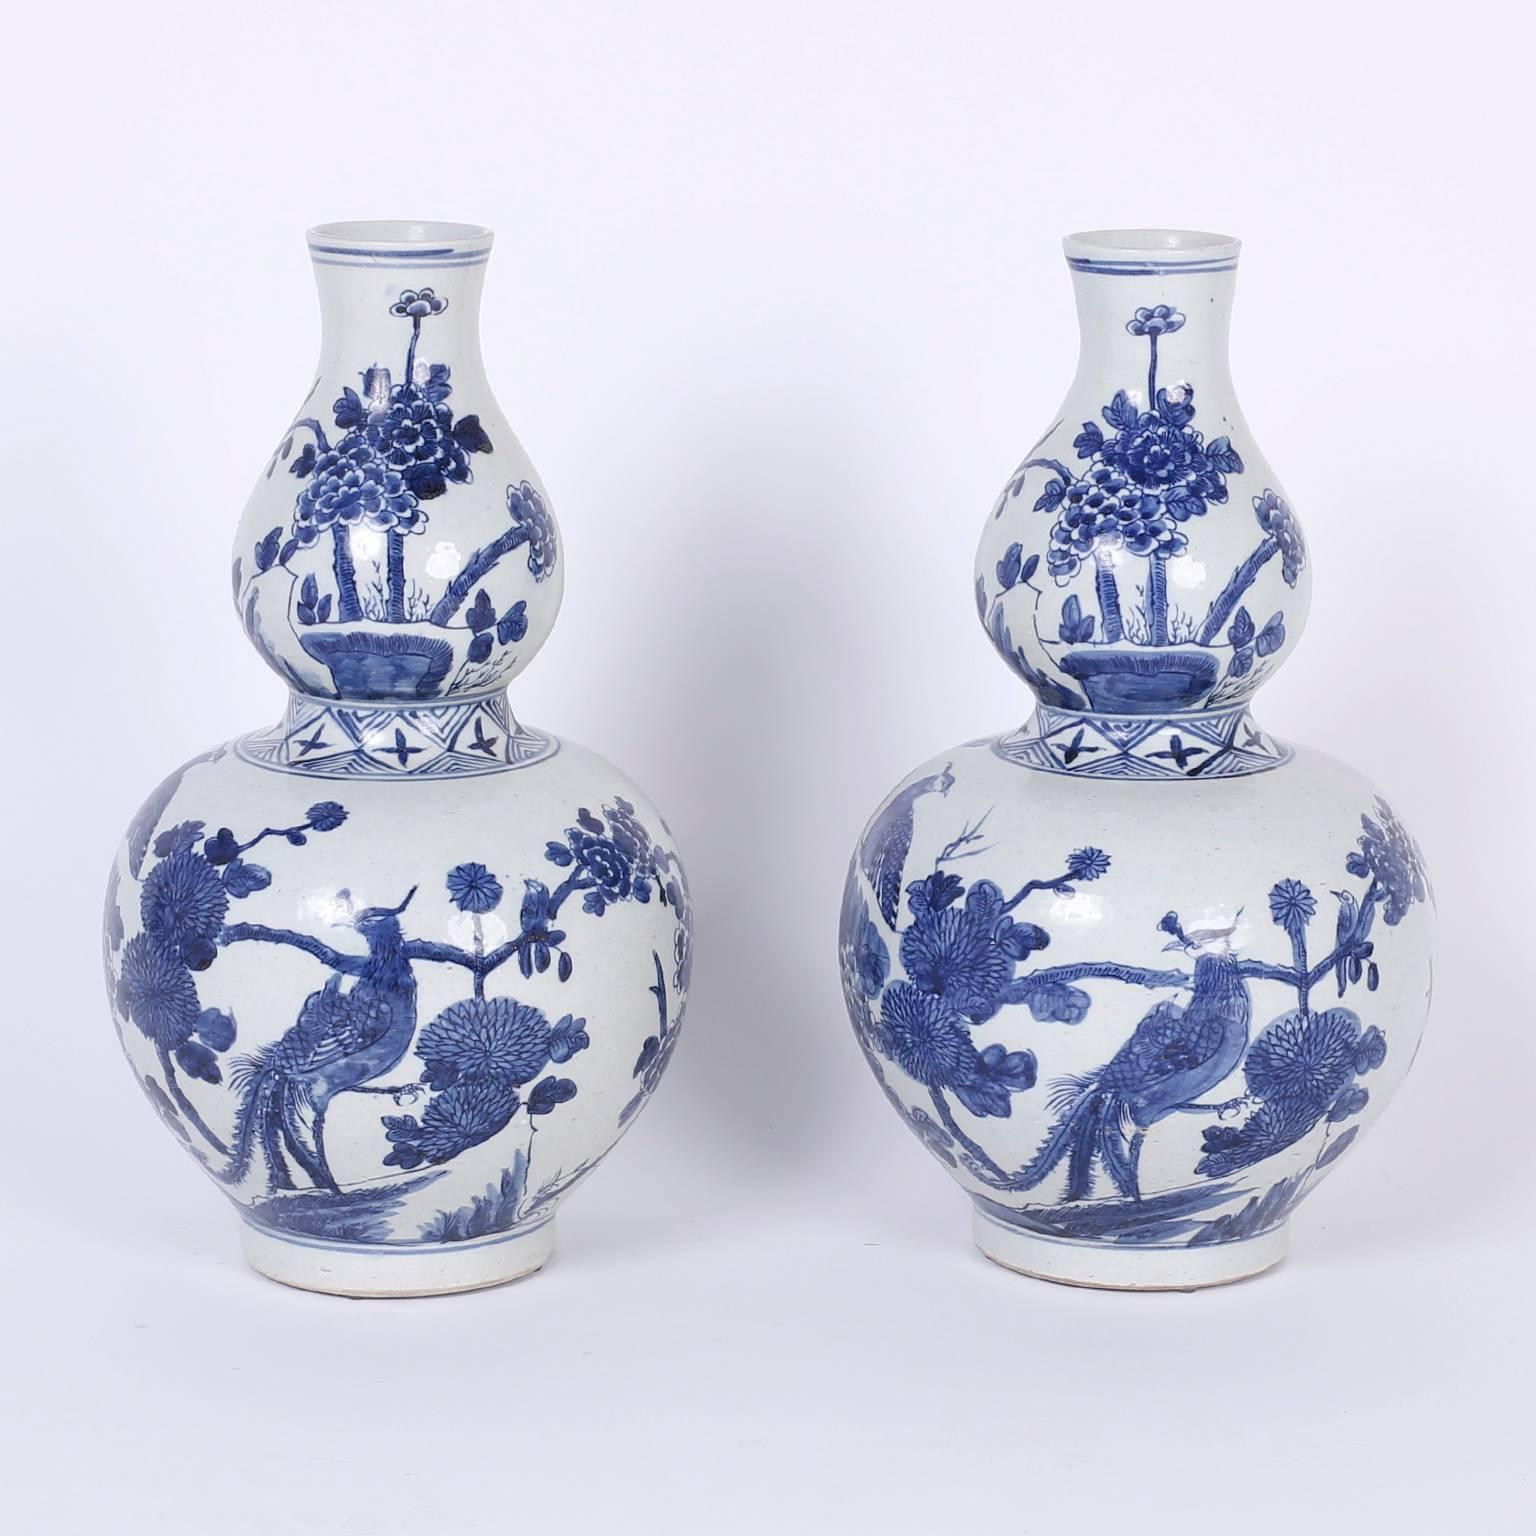 Pair of blue and white Chinese porcelain vases with classic double gourd form and hand decorated fauna and flora depicting quails and peonies.